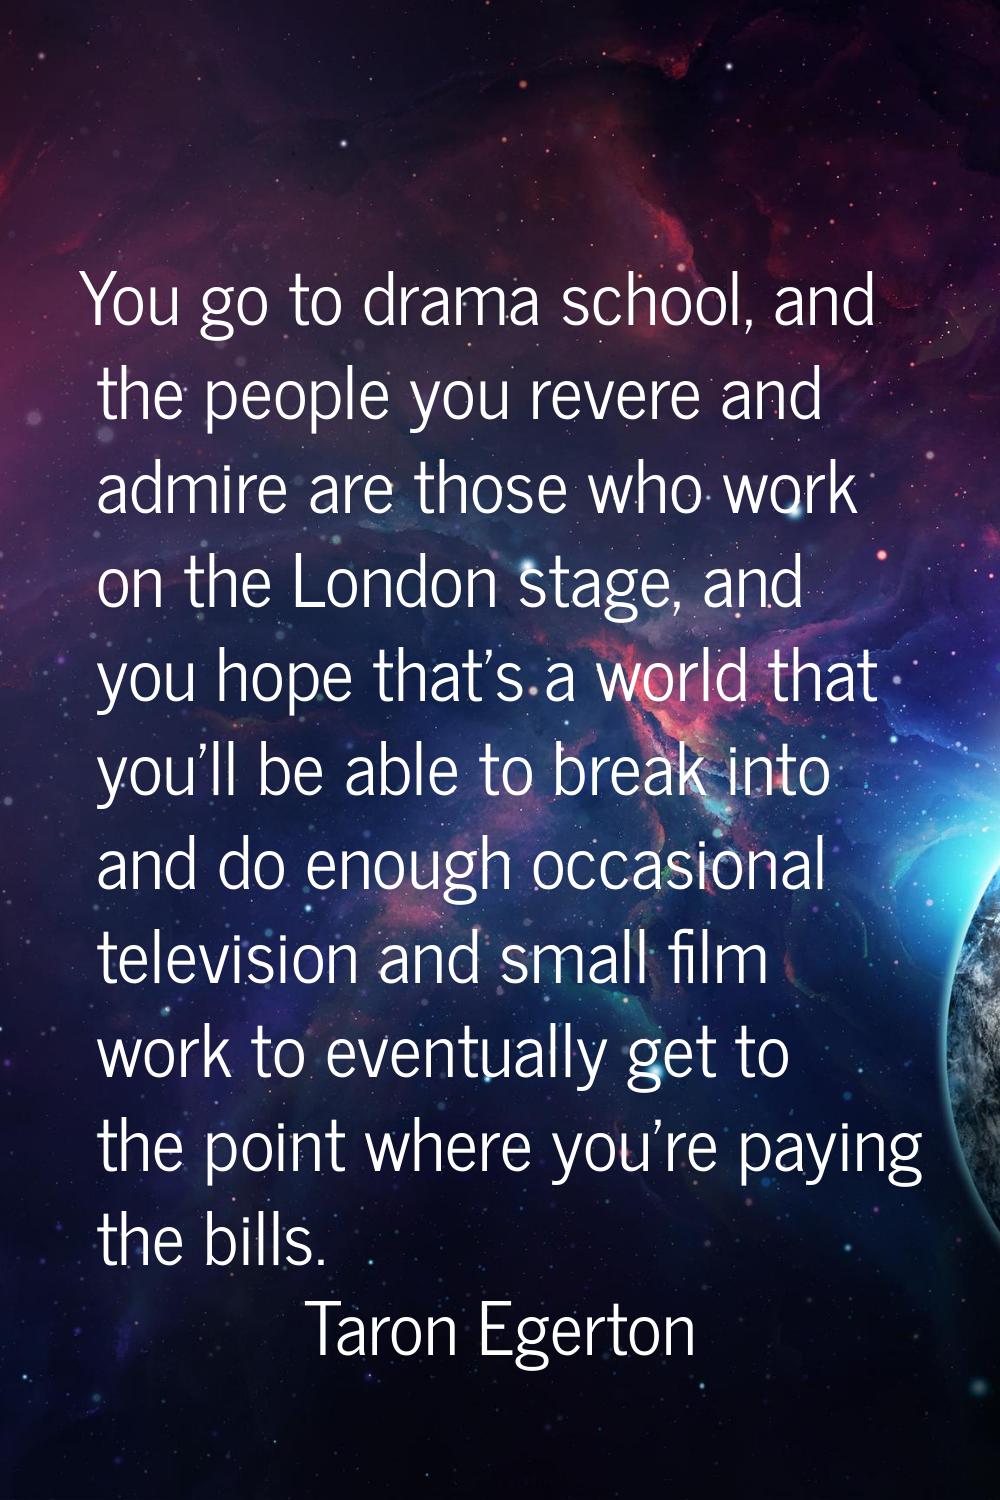 You go to drama school, and the people you revere and admire are those who work on the London stage